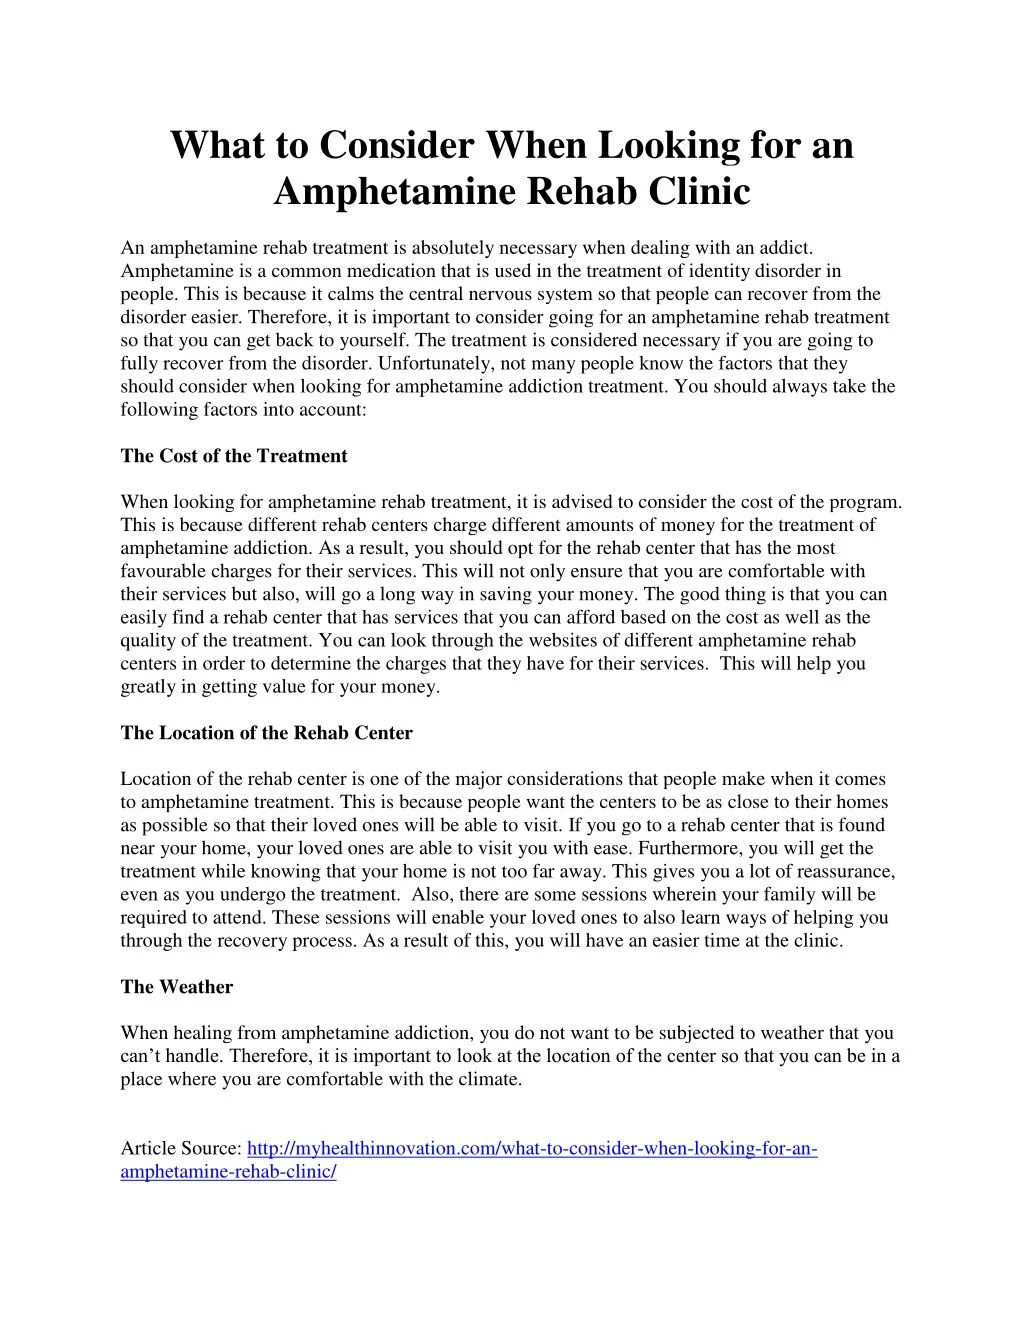 what to consider when looking for an amphetamine